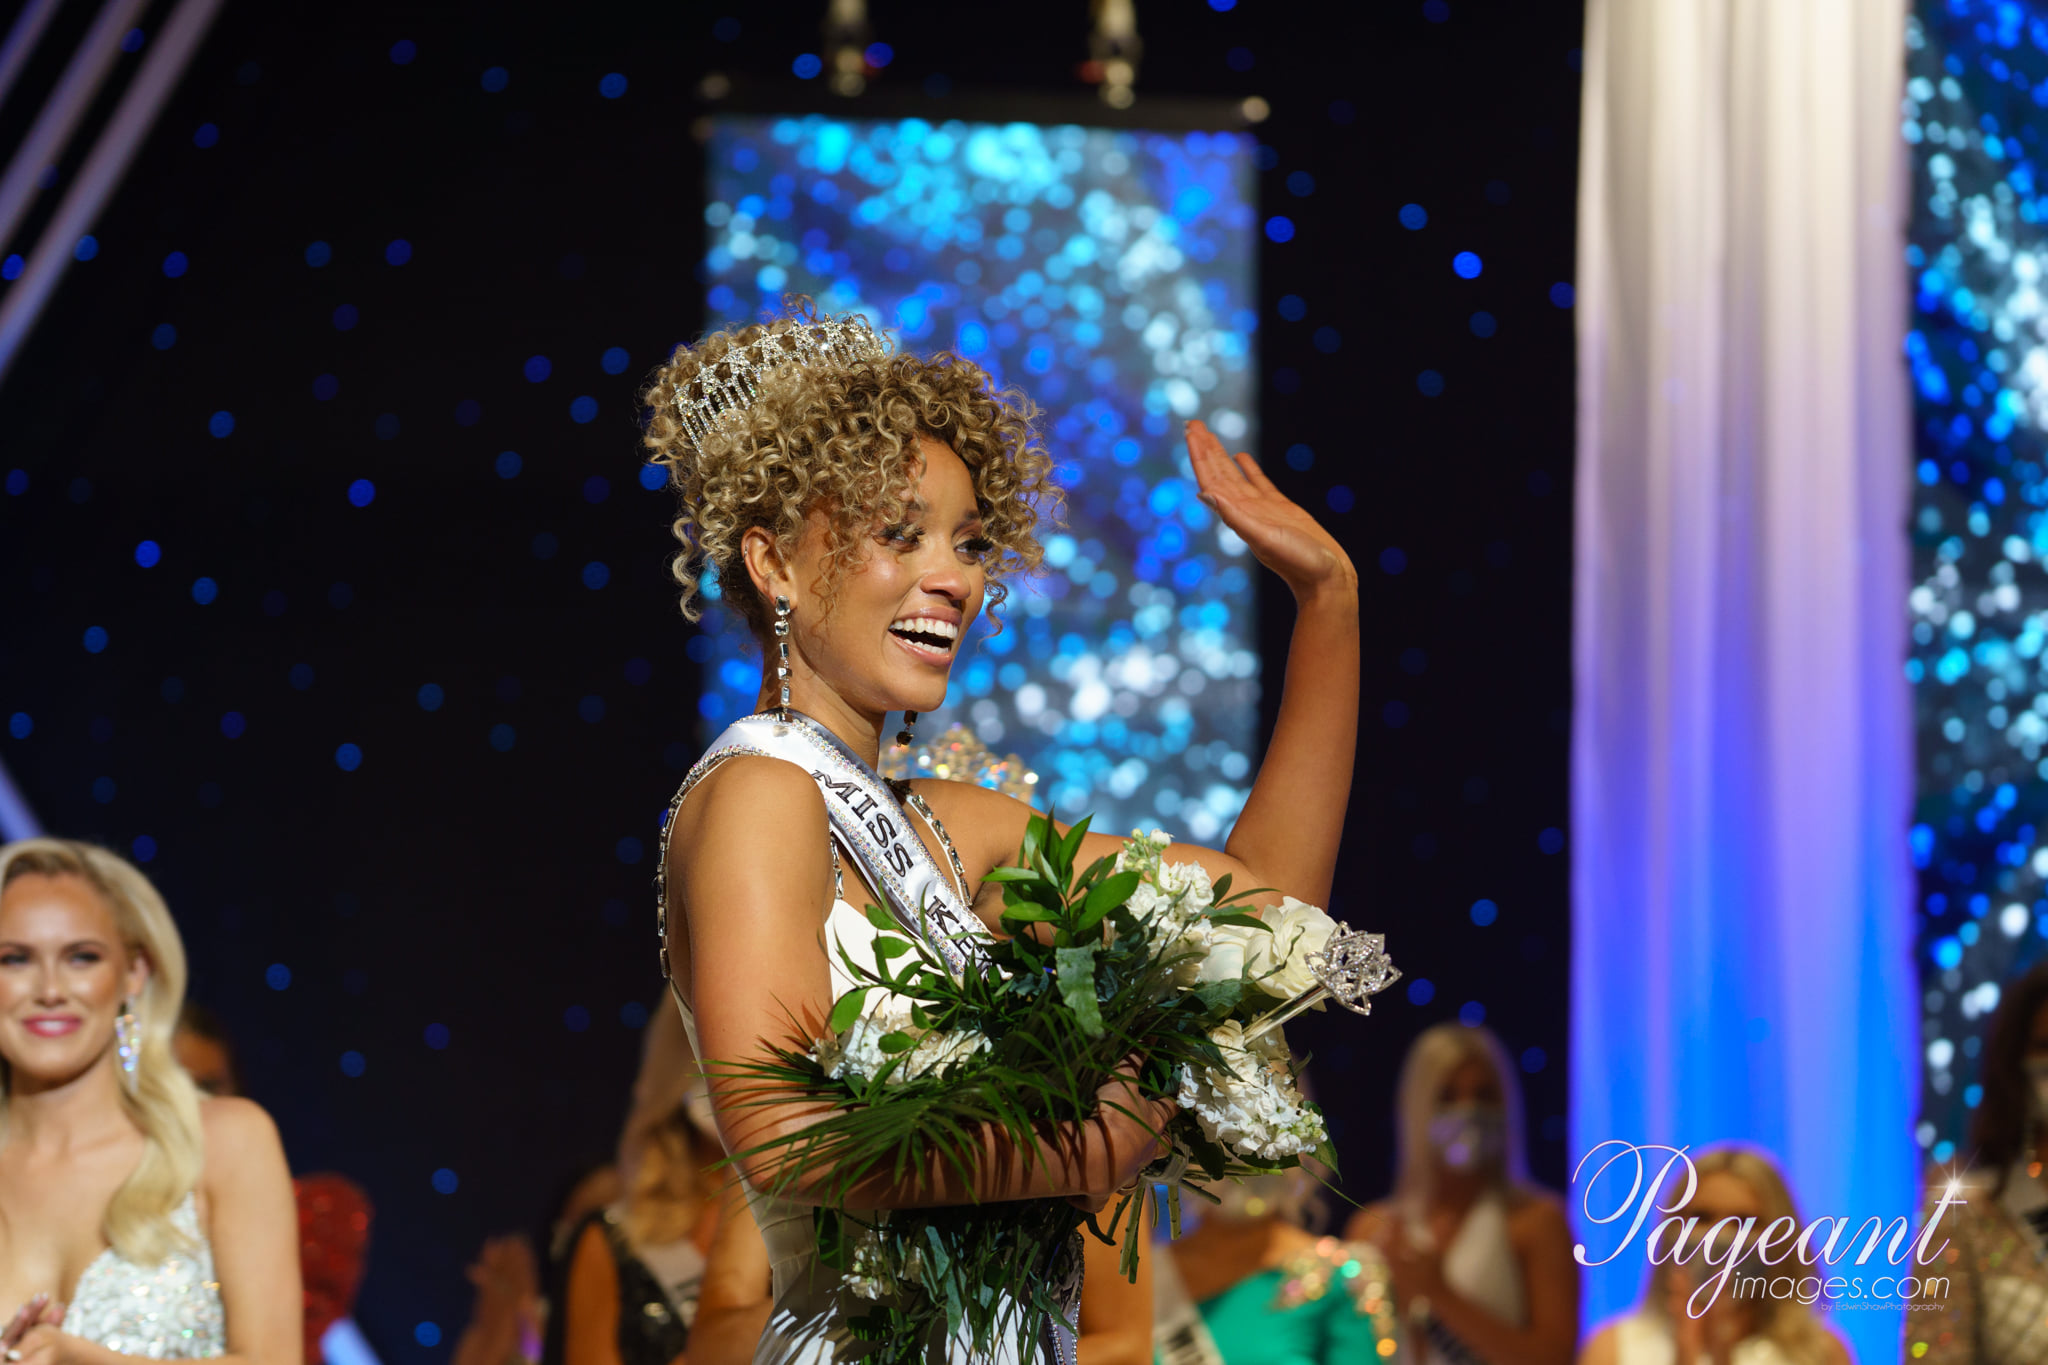 Elle Smith takes her first walk as Miss Kentucky USA 2021